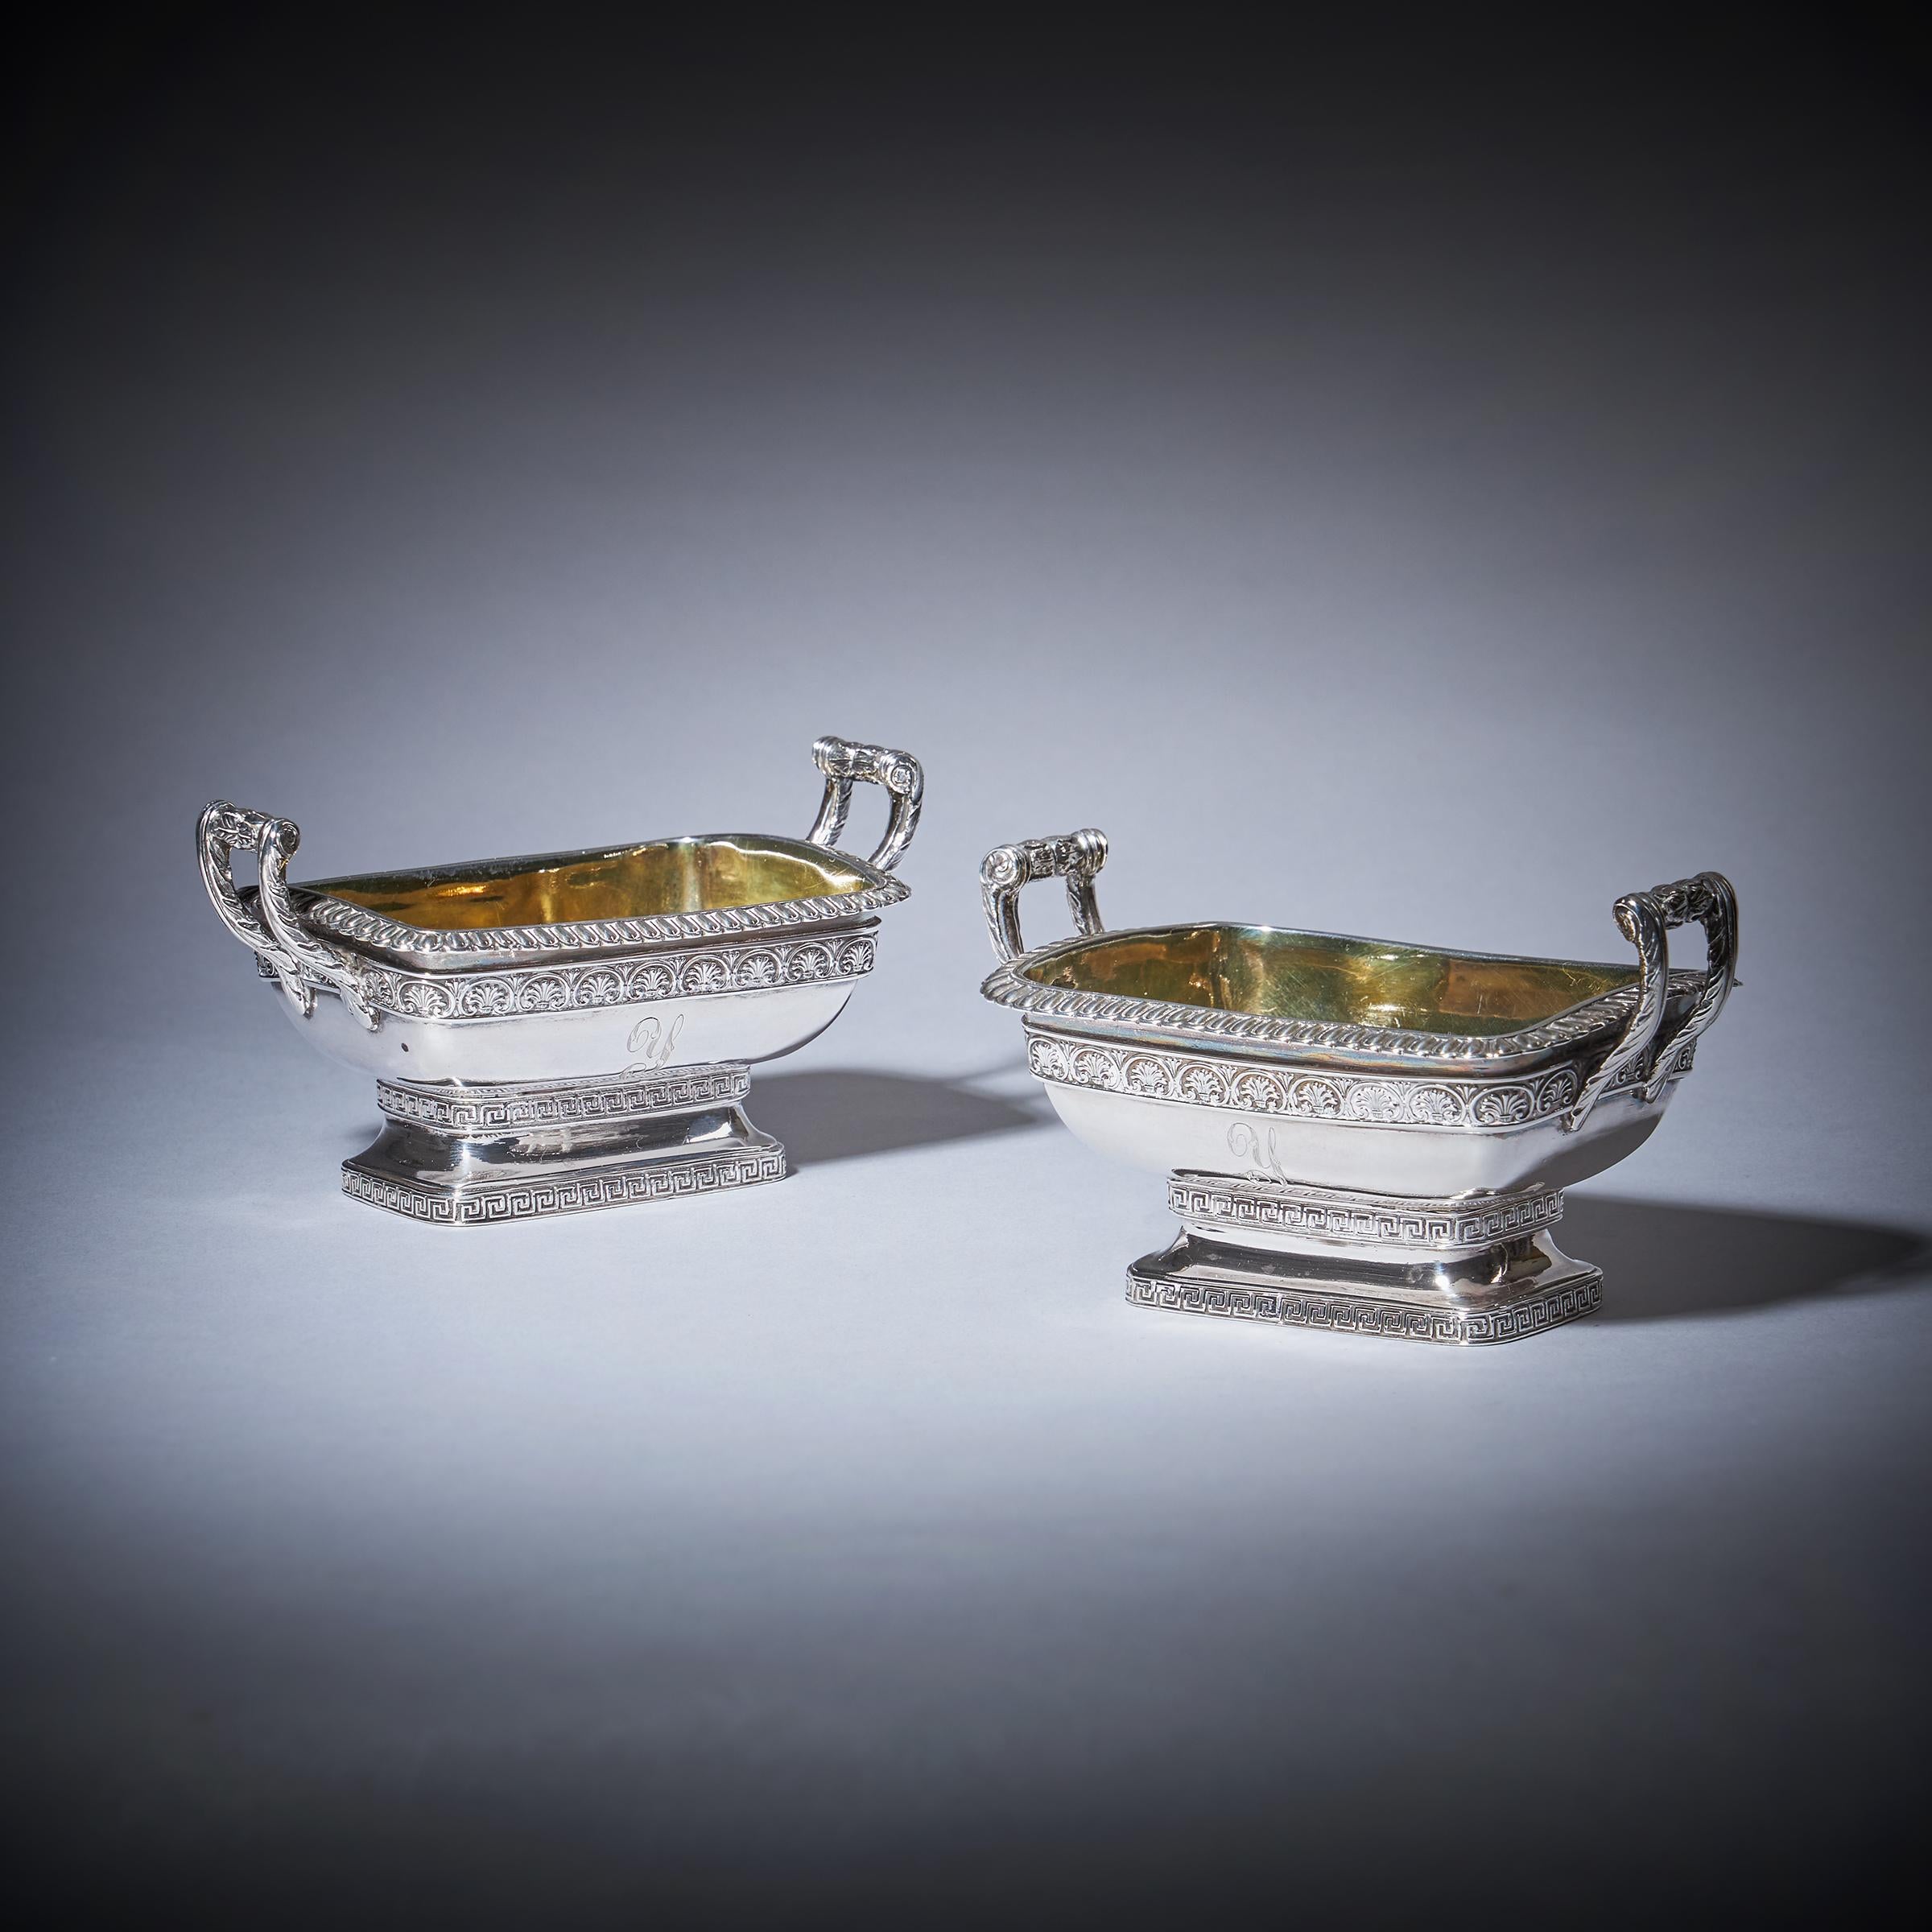 A Fine Pair of Twin Handled George III Grand Tour Influenced Silver-Gilt Salts of Bath Form by William Fountain, London 1808.

Each lined in gilt and finely tooled with leaf clasp scroll handles and a fluted border. Embossed to the frieze in an